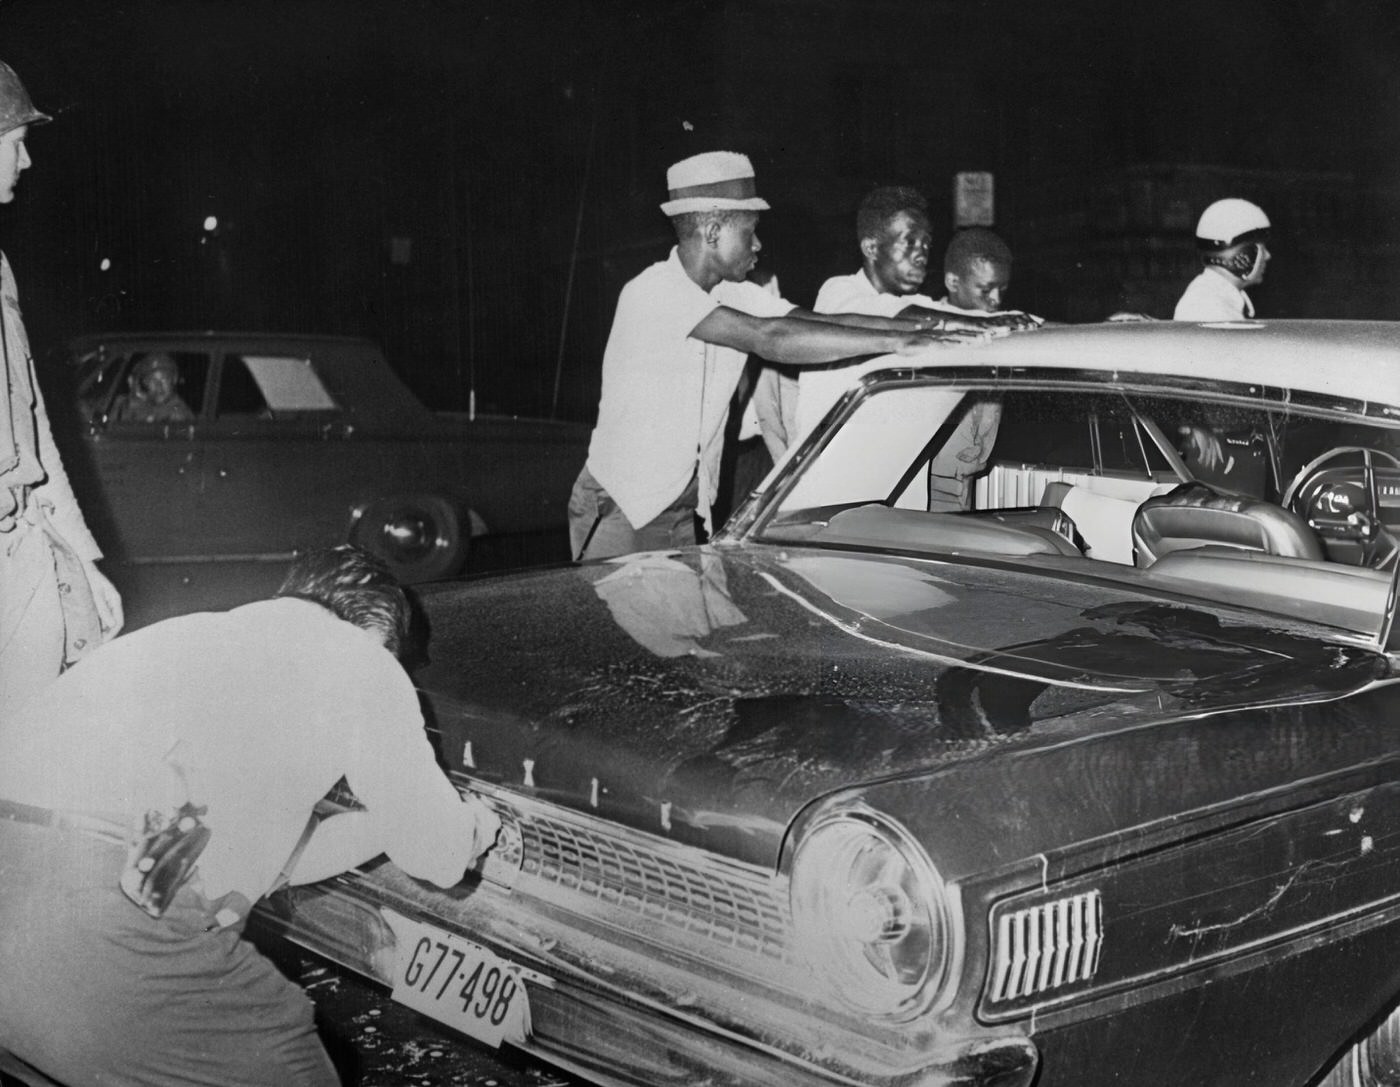 Suspected rioters place their hands on the roof of their car after they had been stopped by police during the riots